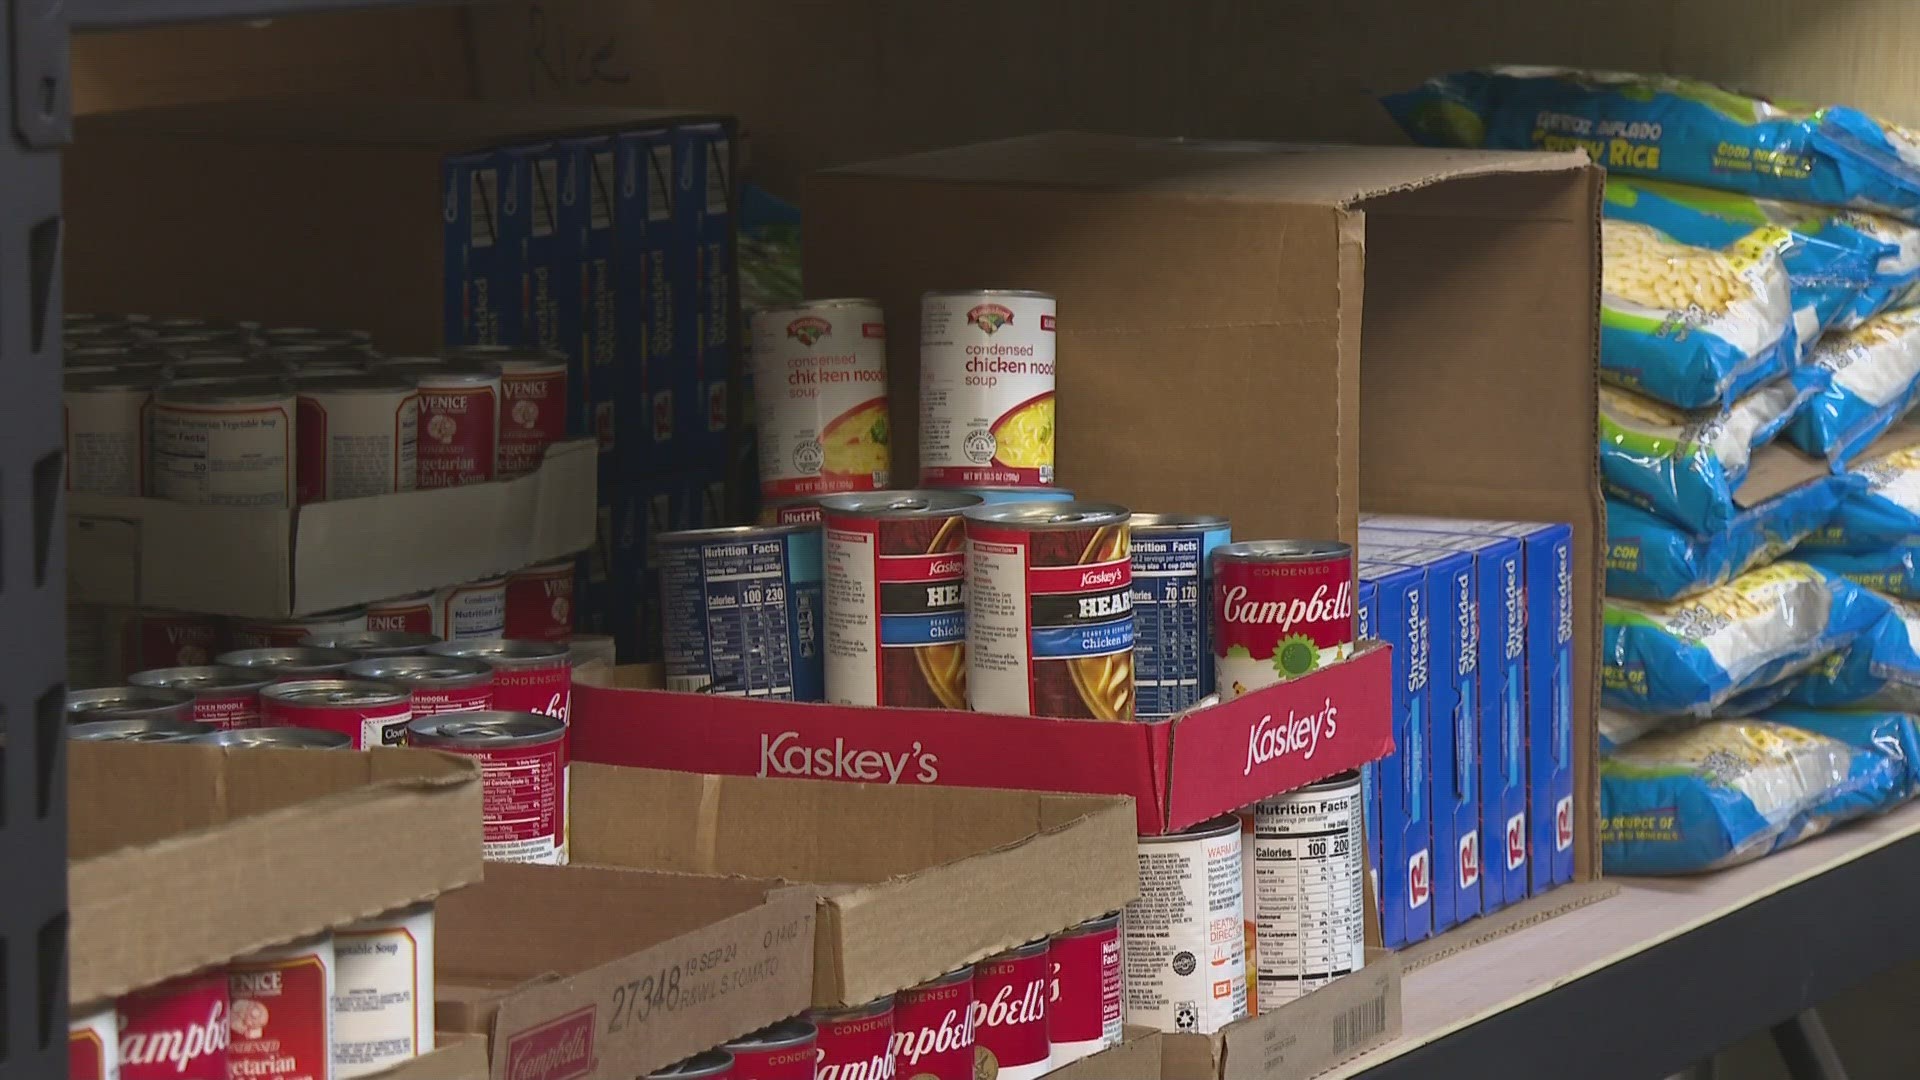 Organizations such as the Good Shepherd Food Bank and South Portland Food Cupboard say they've already seen a higher demand for services since the benefits ended.